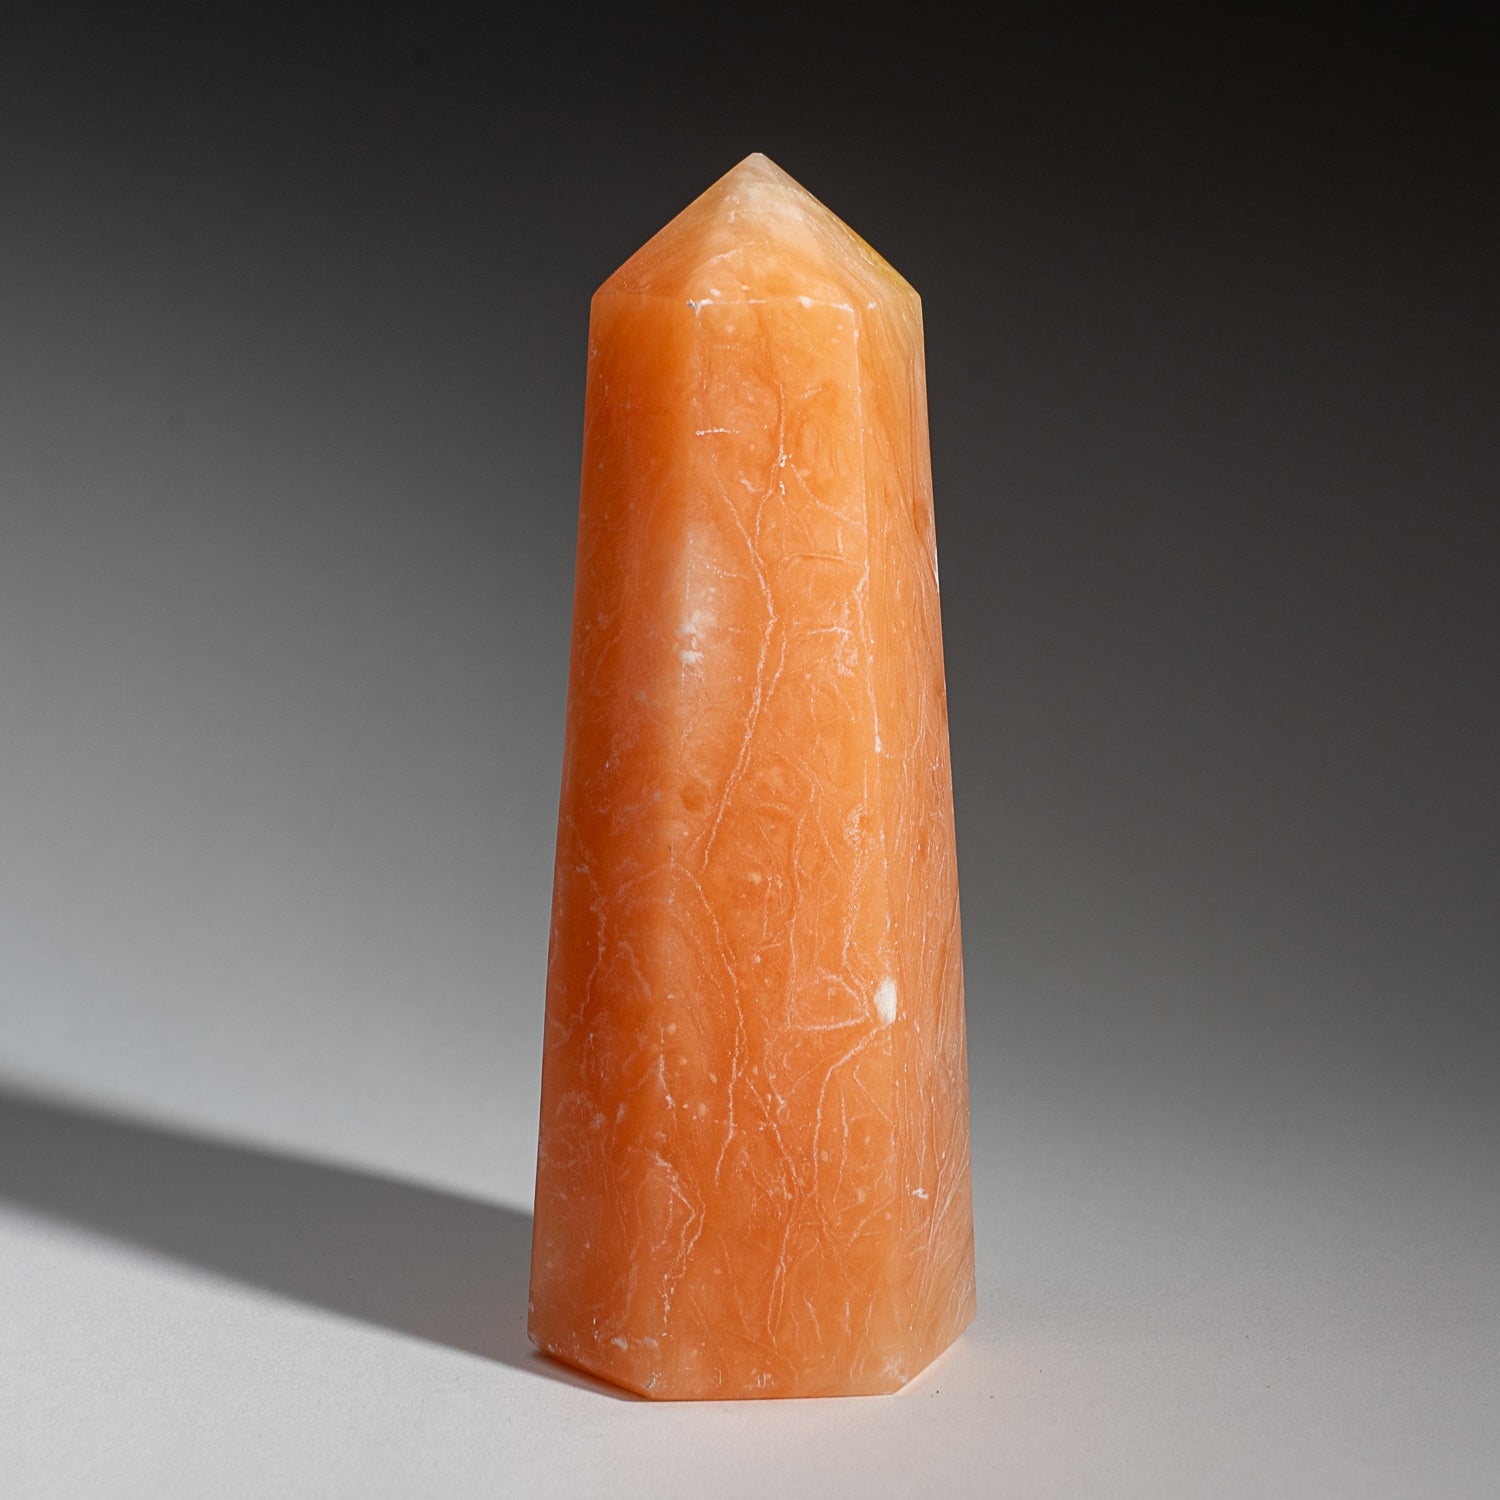 Genuine Polished Orange Selenite Point from Morocco (1.9 lbs)